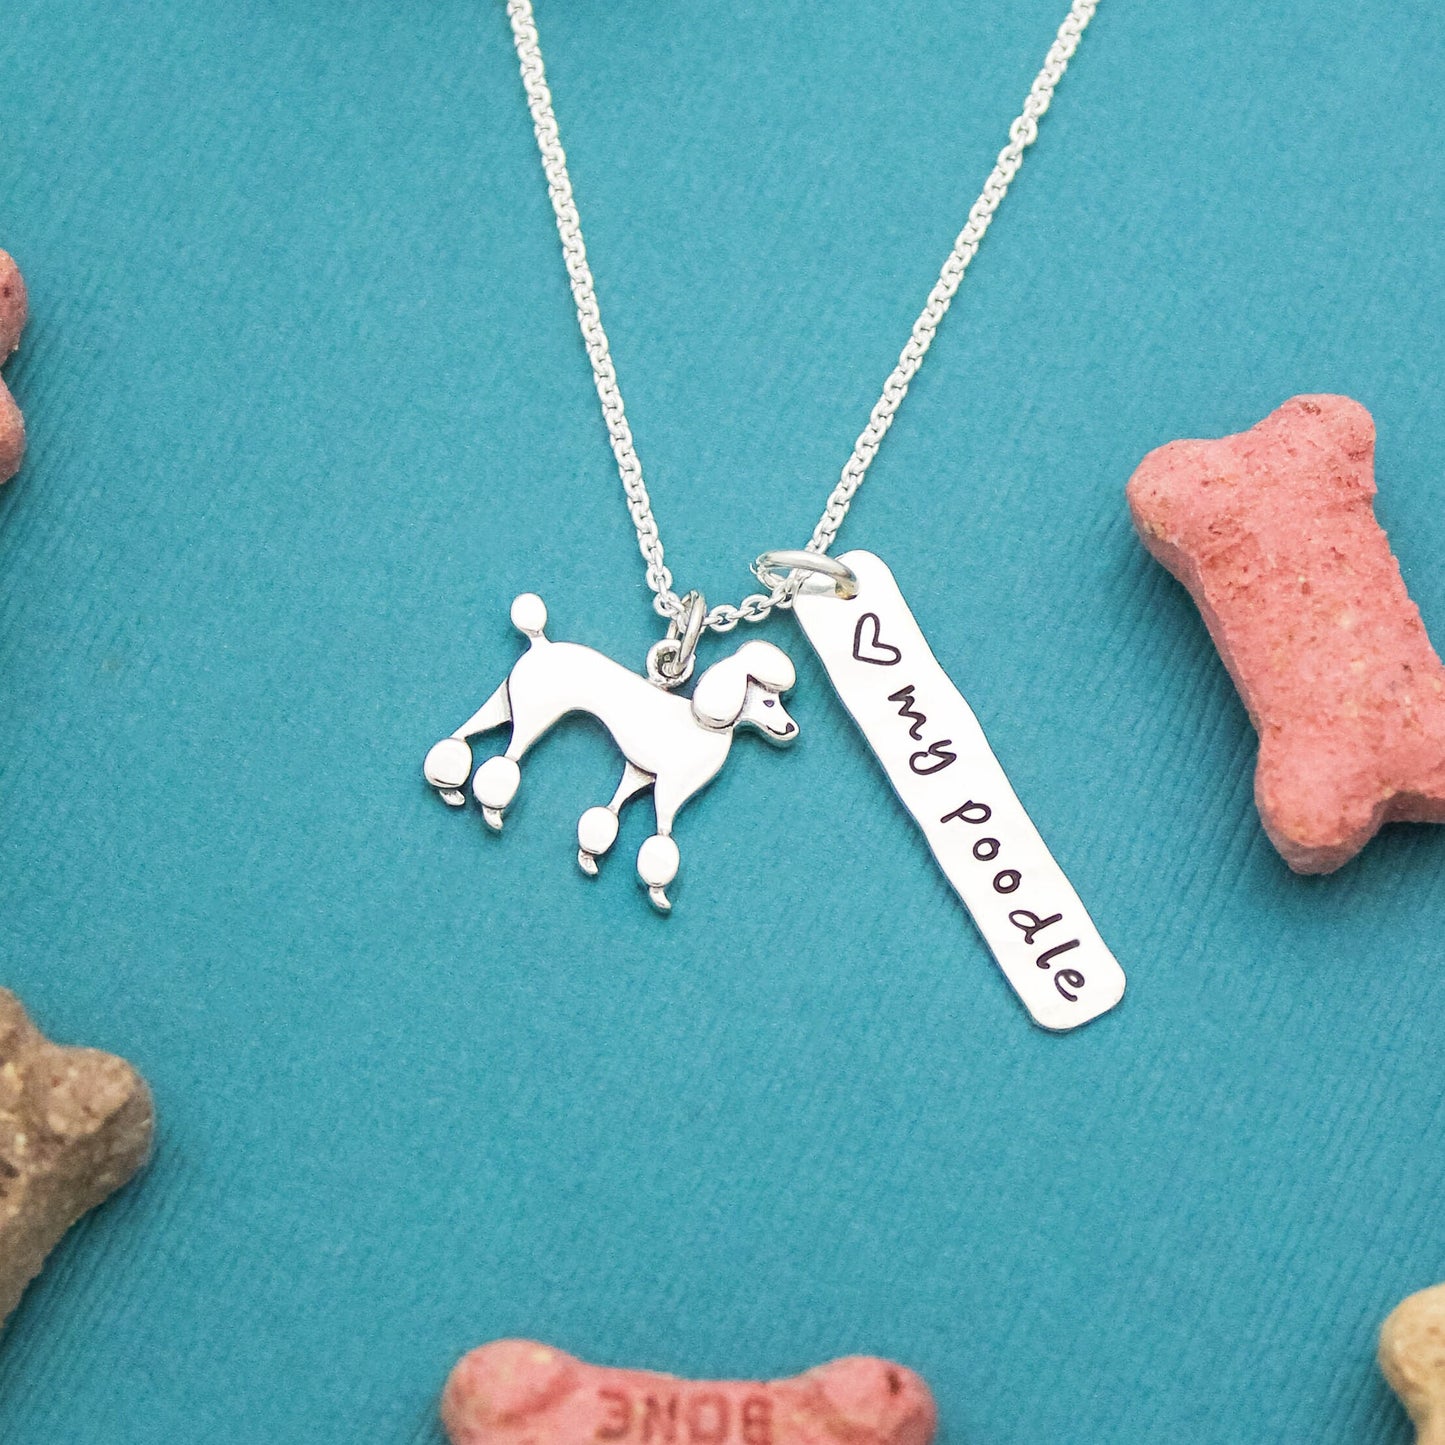 LOVE my POODLE Necklace, Sterling Silver Dog Necklace, Poodle Lover Gift, New Pet Gift, Dog Poodle Jewelry, Poodle Necklace, Hand Stamped